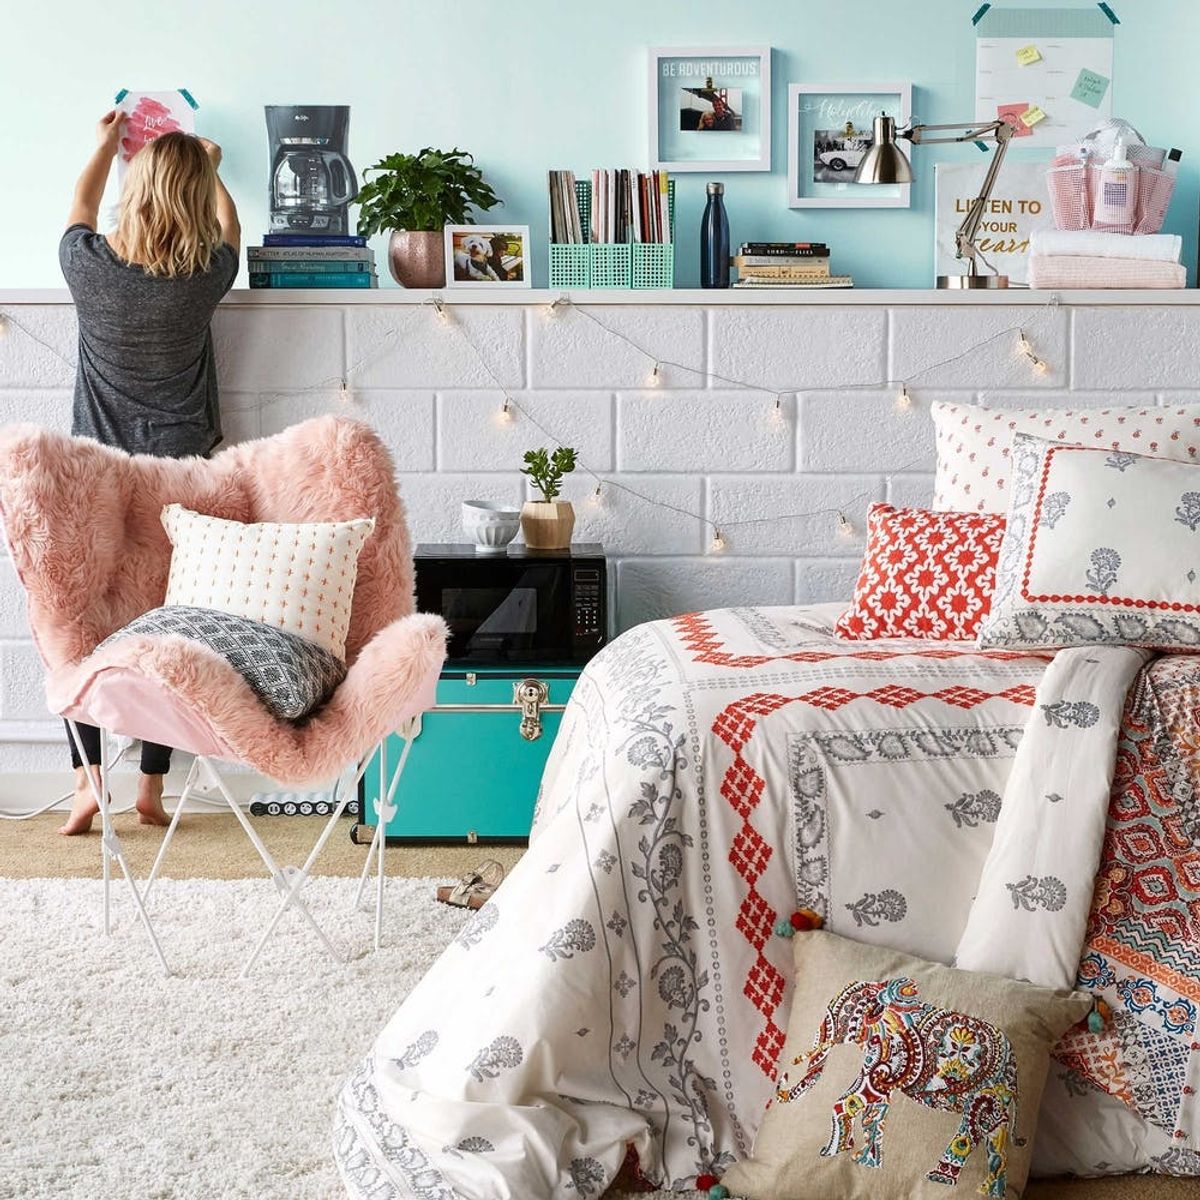 Headed to College? Here Are 4 Easy Ways to Decorate Your Dorm